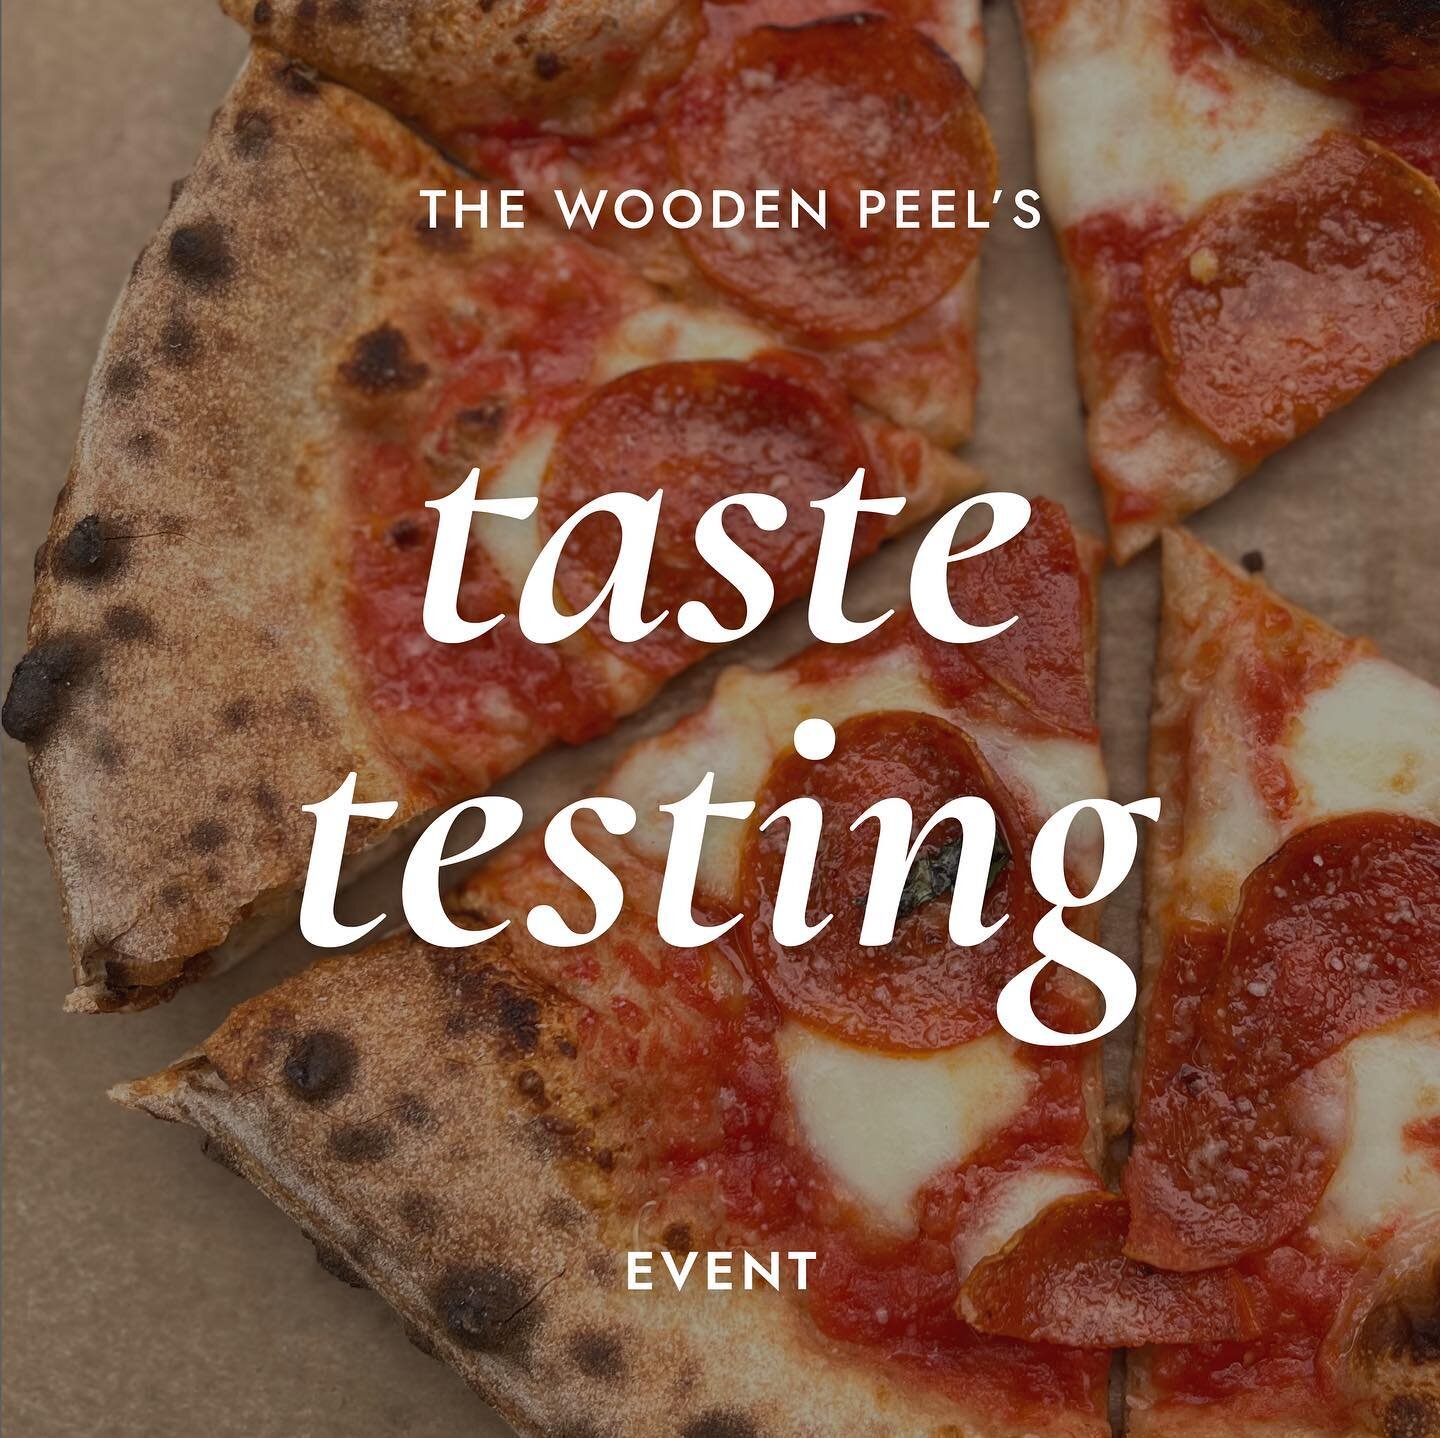 To keep things simple, our catering menu is pretty limited, but we're anxious to shake things up and try some unique toppings! On Saturday, July 15th, we're holding a taste testing event. We're going to attempt 6 new pizzas and we'd love to share the